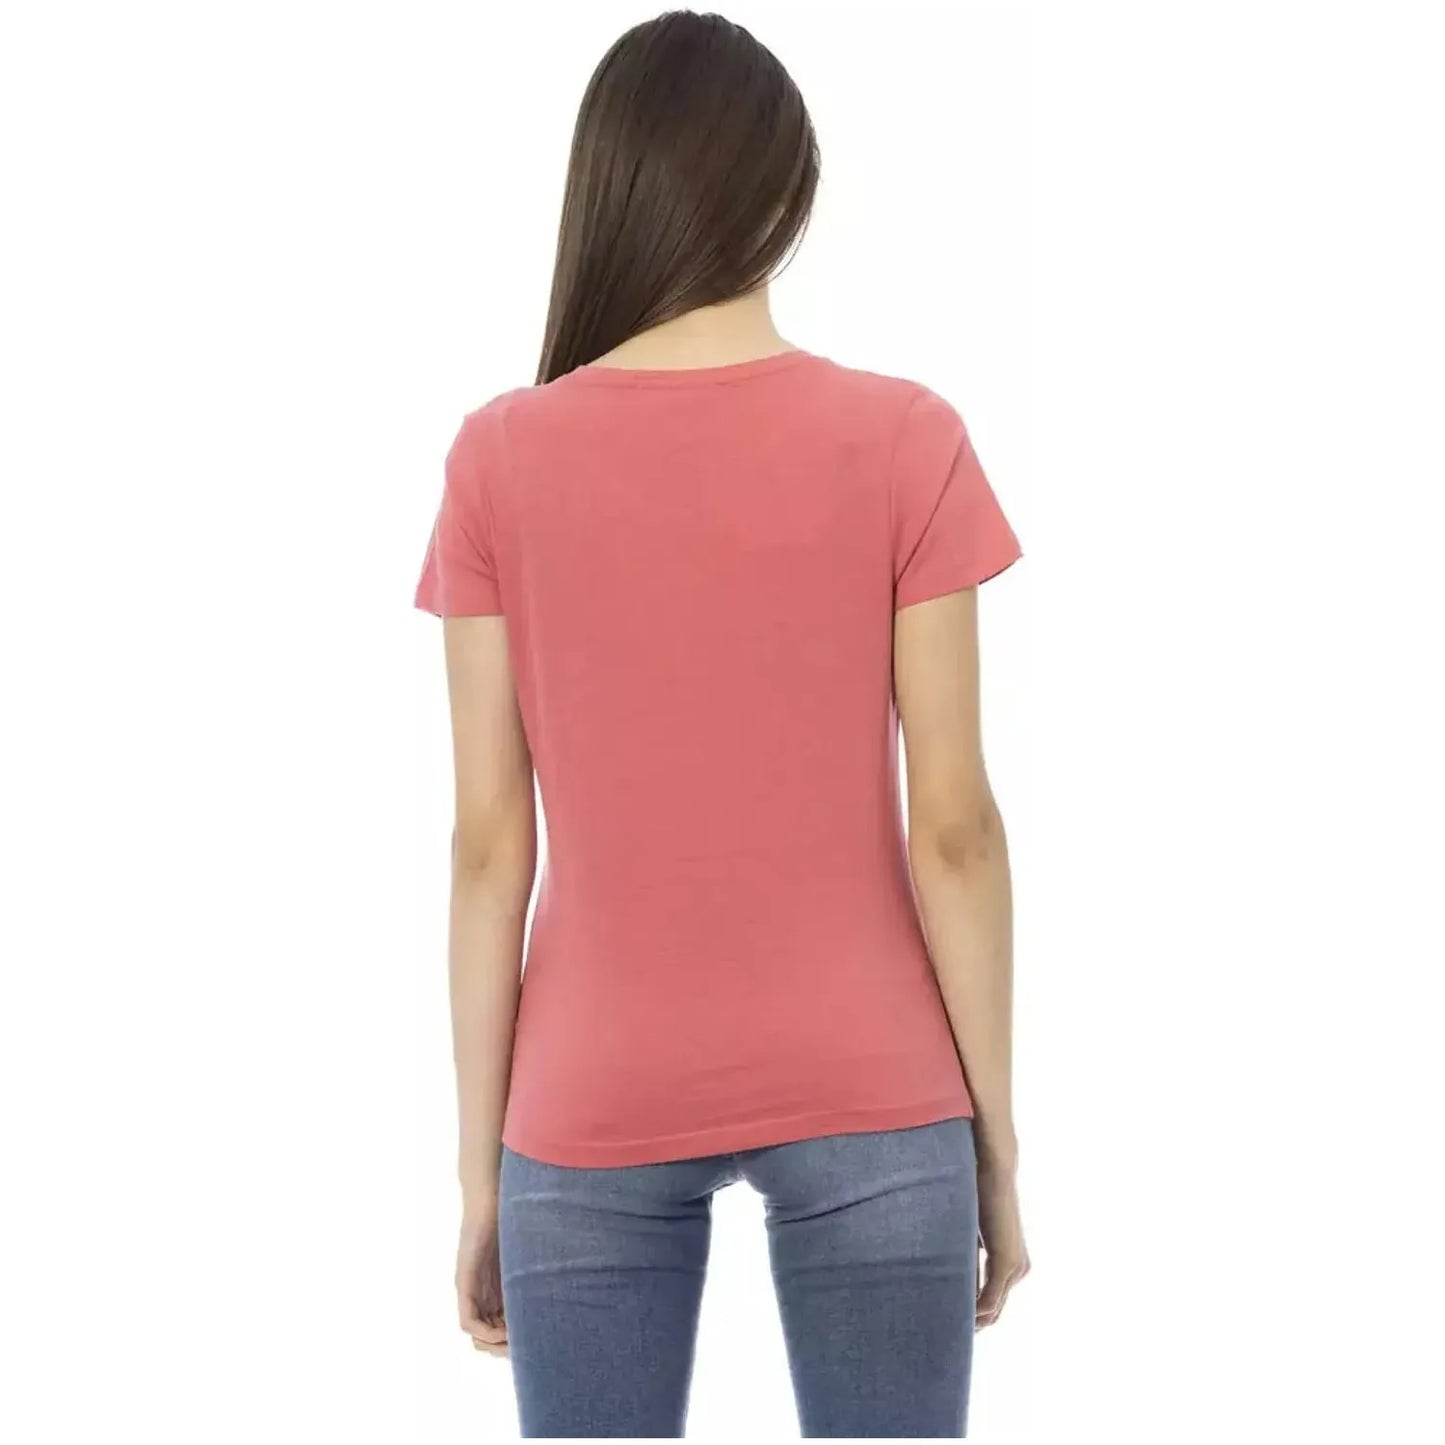 Trussardi Action Elegant Pink V-Neck Tee with Chic Print pink-cotton-tops-t-shirt-33